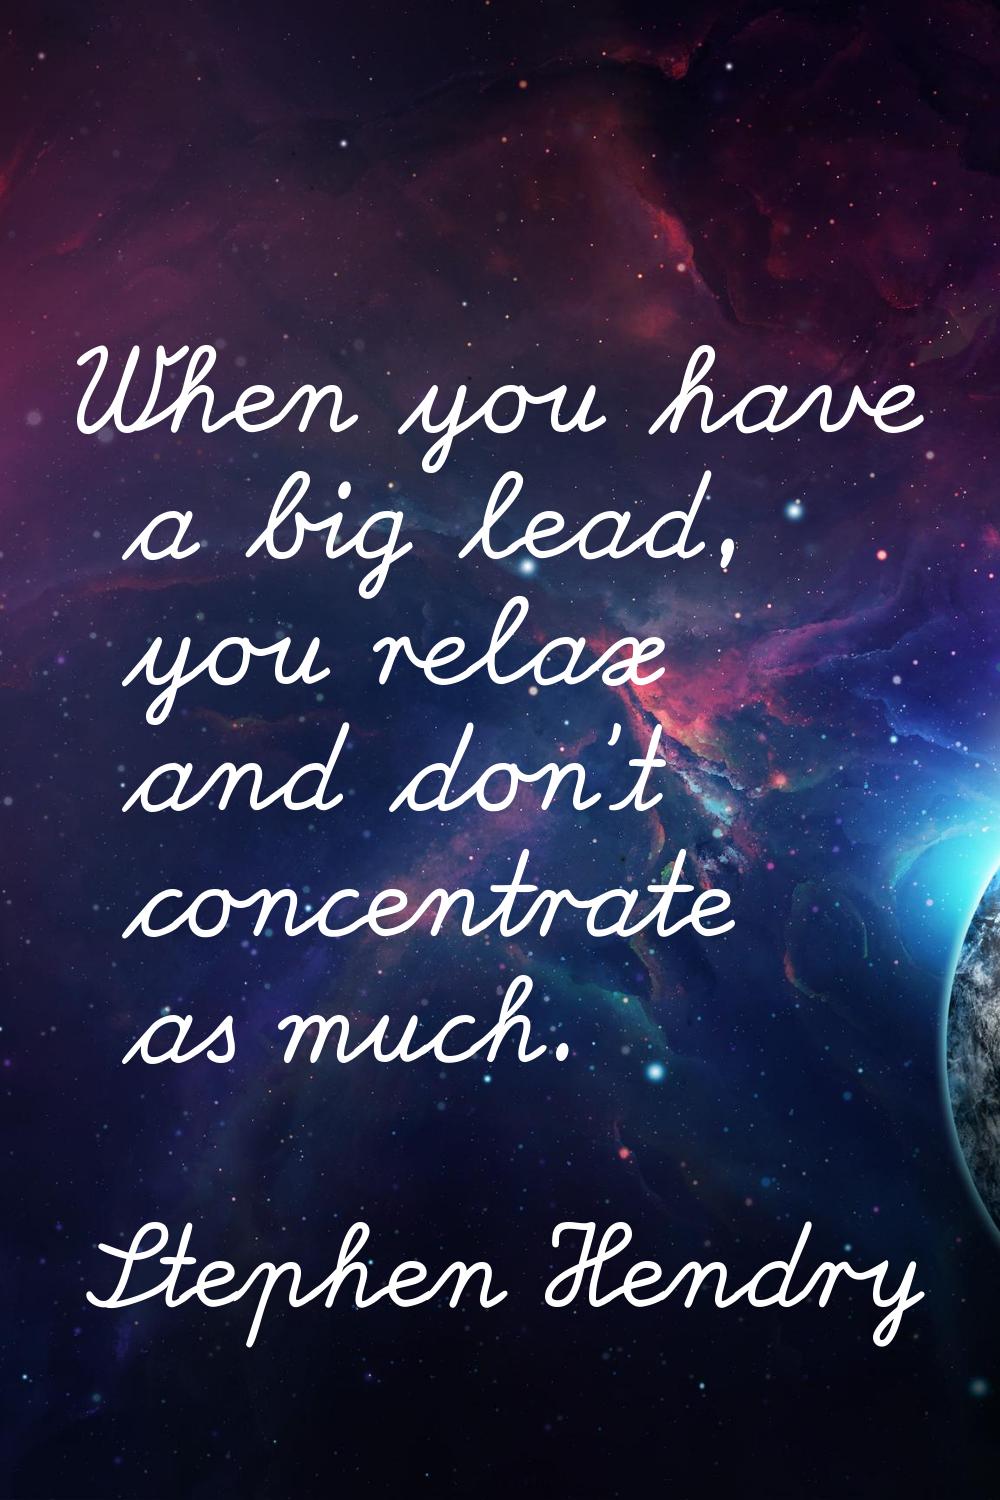 When you have a big lead, you relax and don't concentrate as much.